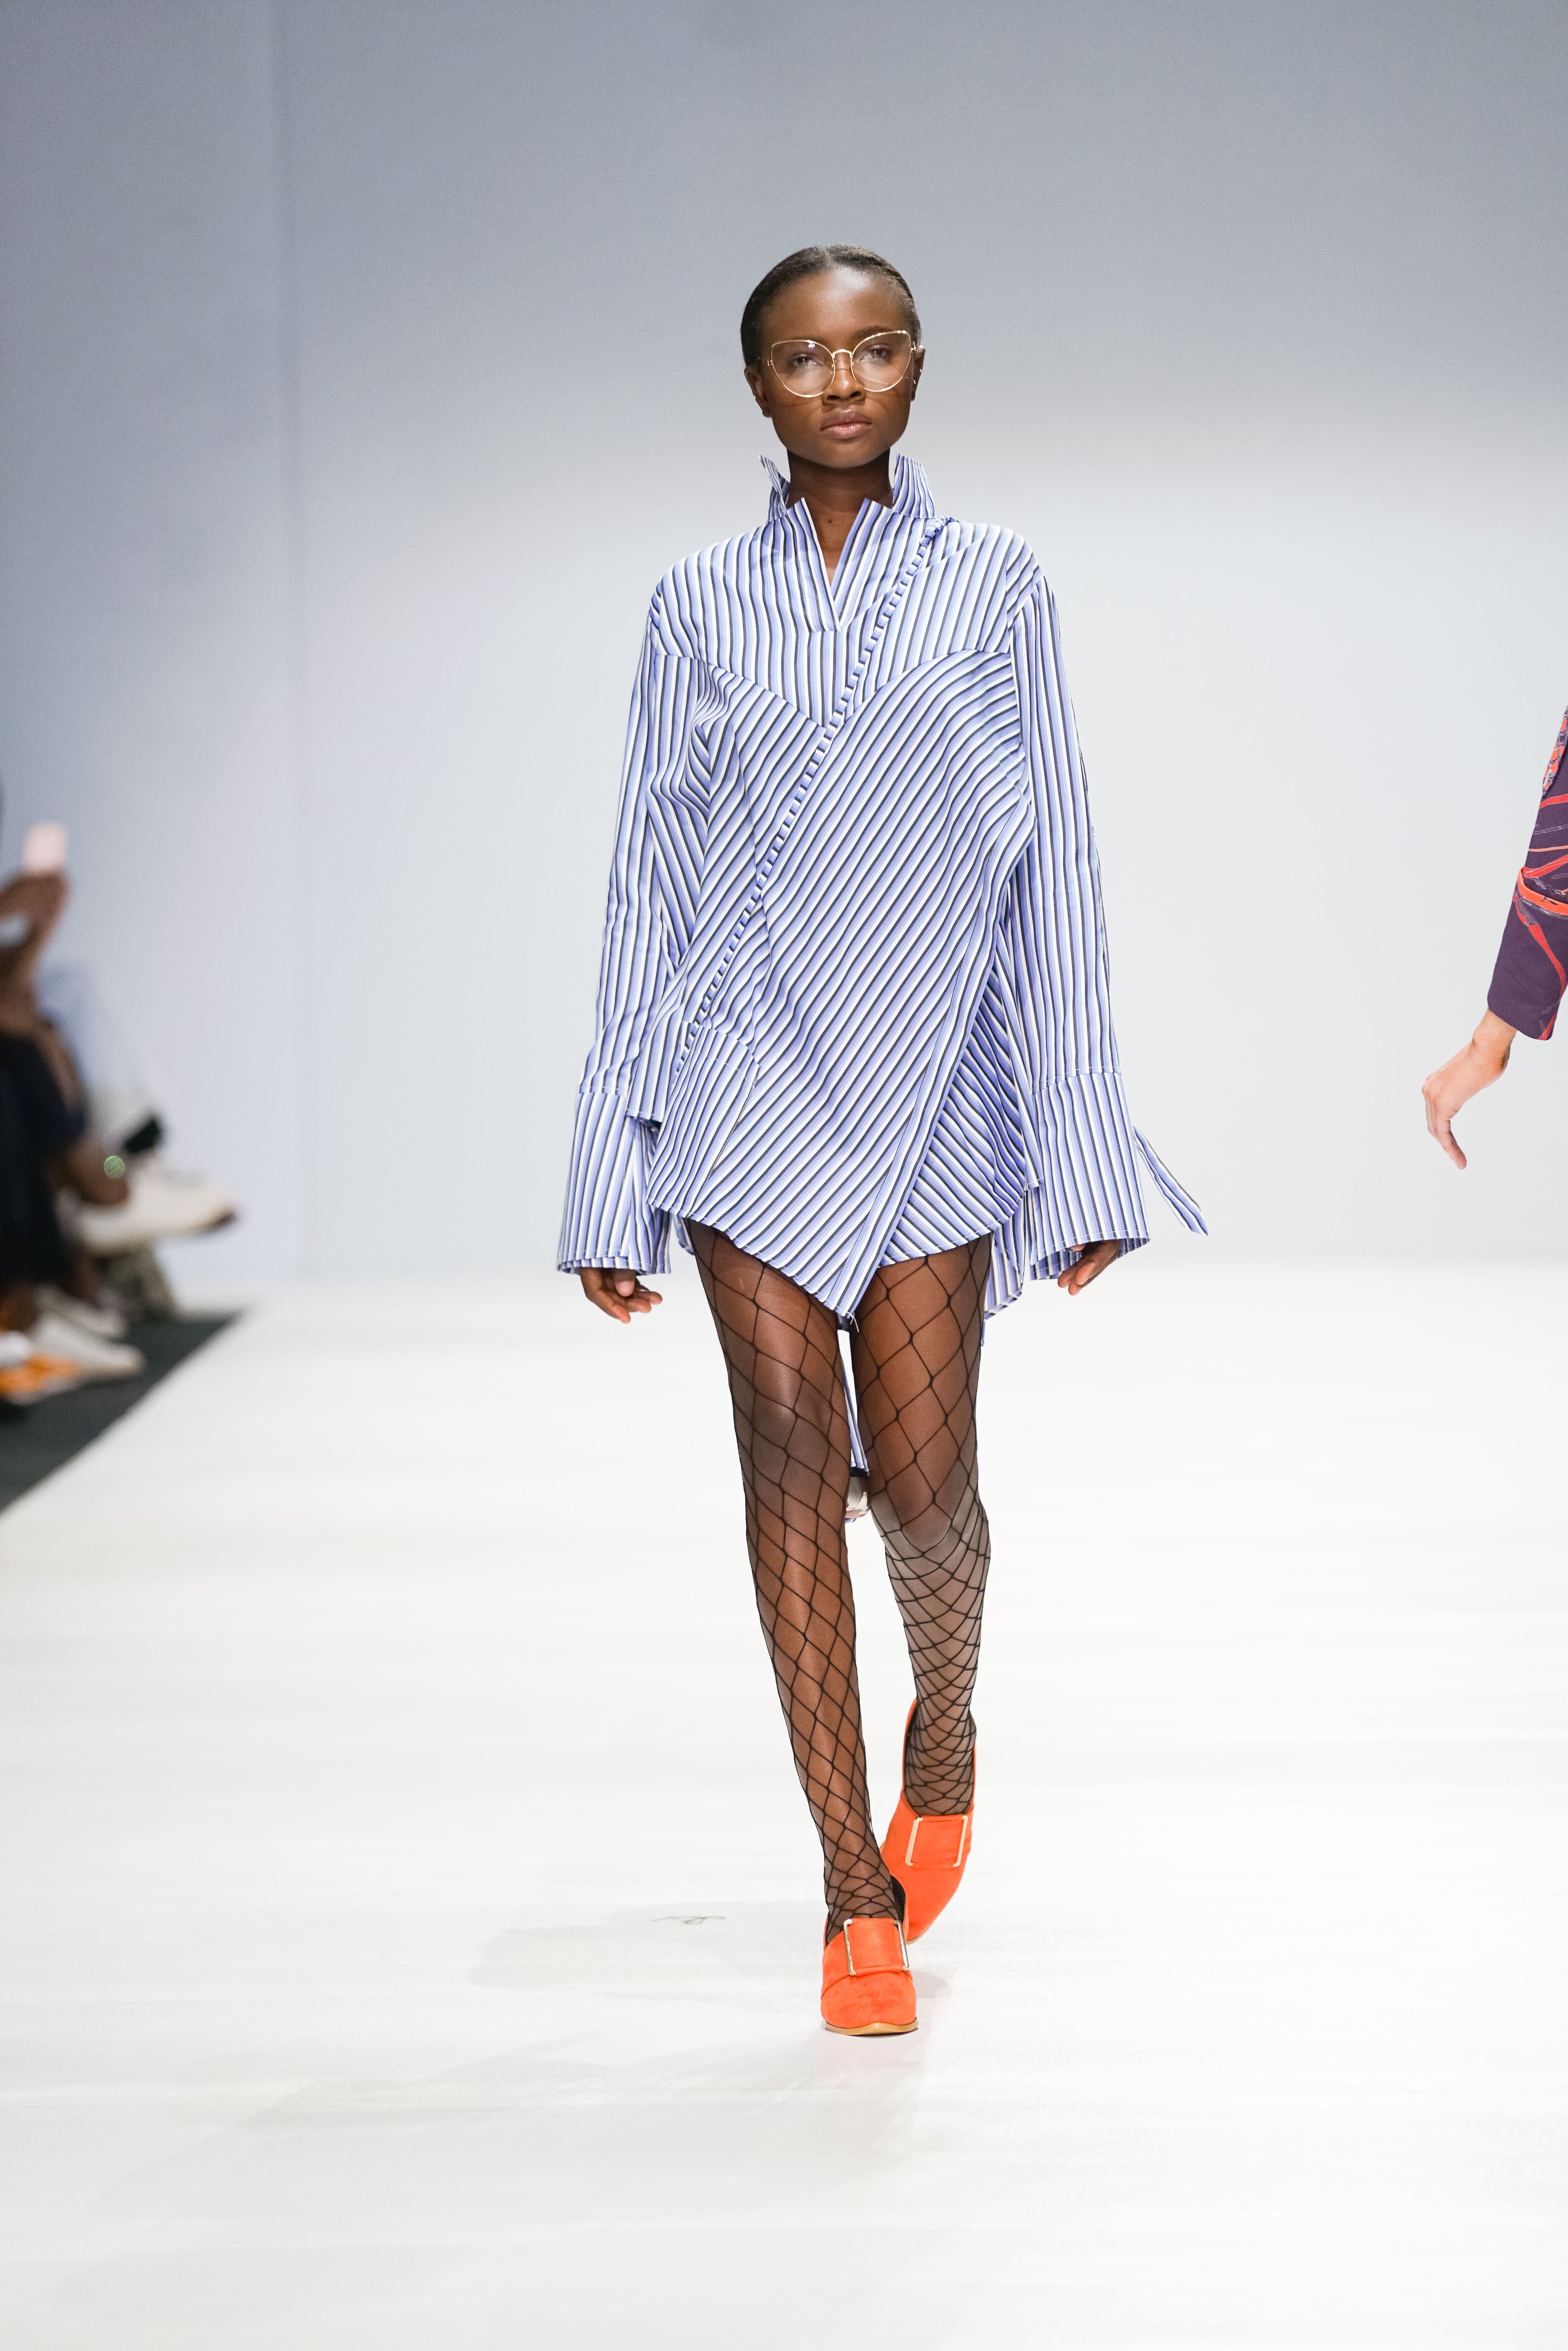 This Young Designer Stole the Show at South African Fashion Week
